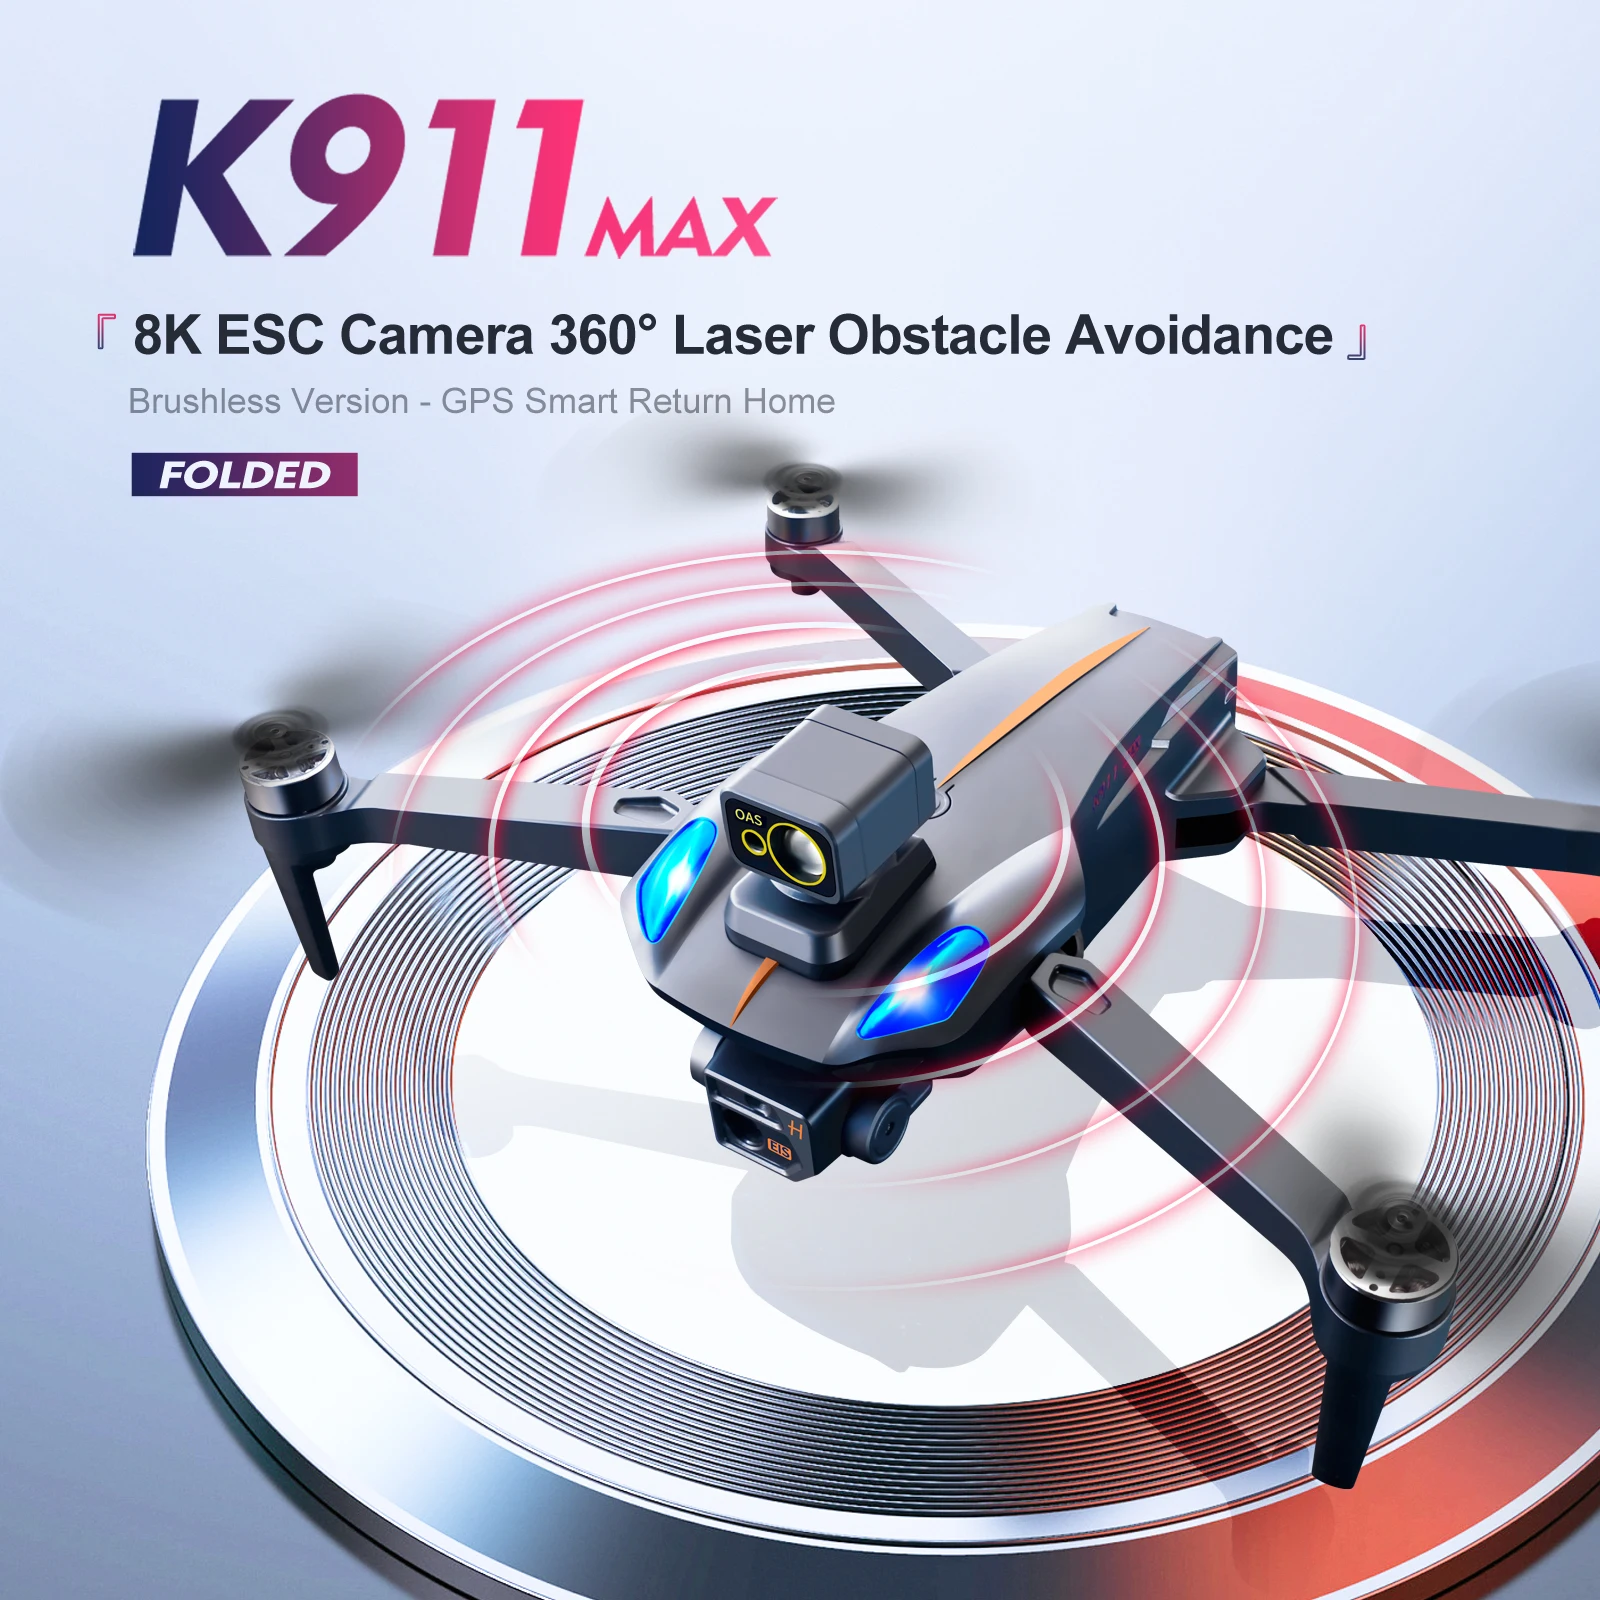 biggest rc helicopter you can buy K911 MAX GPS Drone 4K Professional Obstacle Avoidance 8K Dual HD Camera Brushless Motor Foldable Quadcopter RC Distance 1200M model helicopter